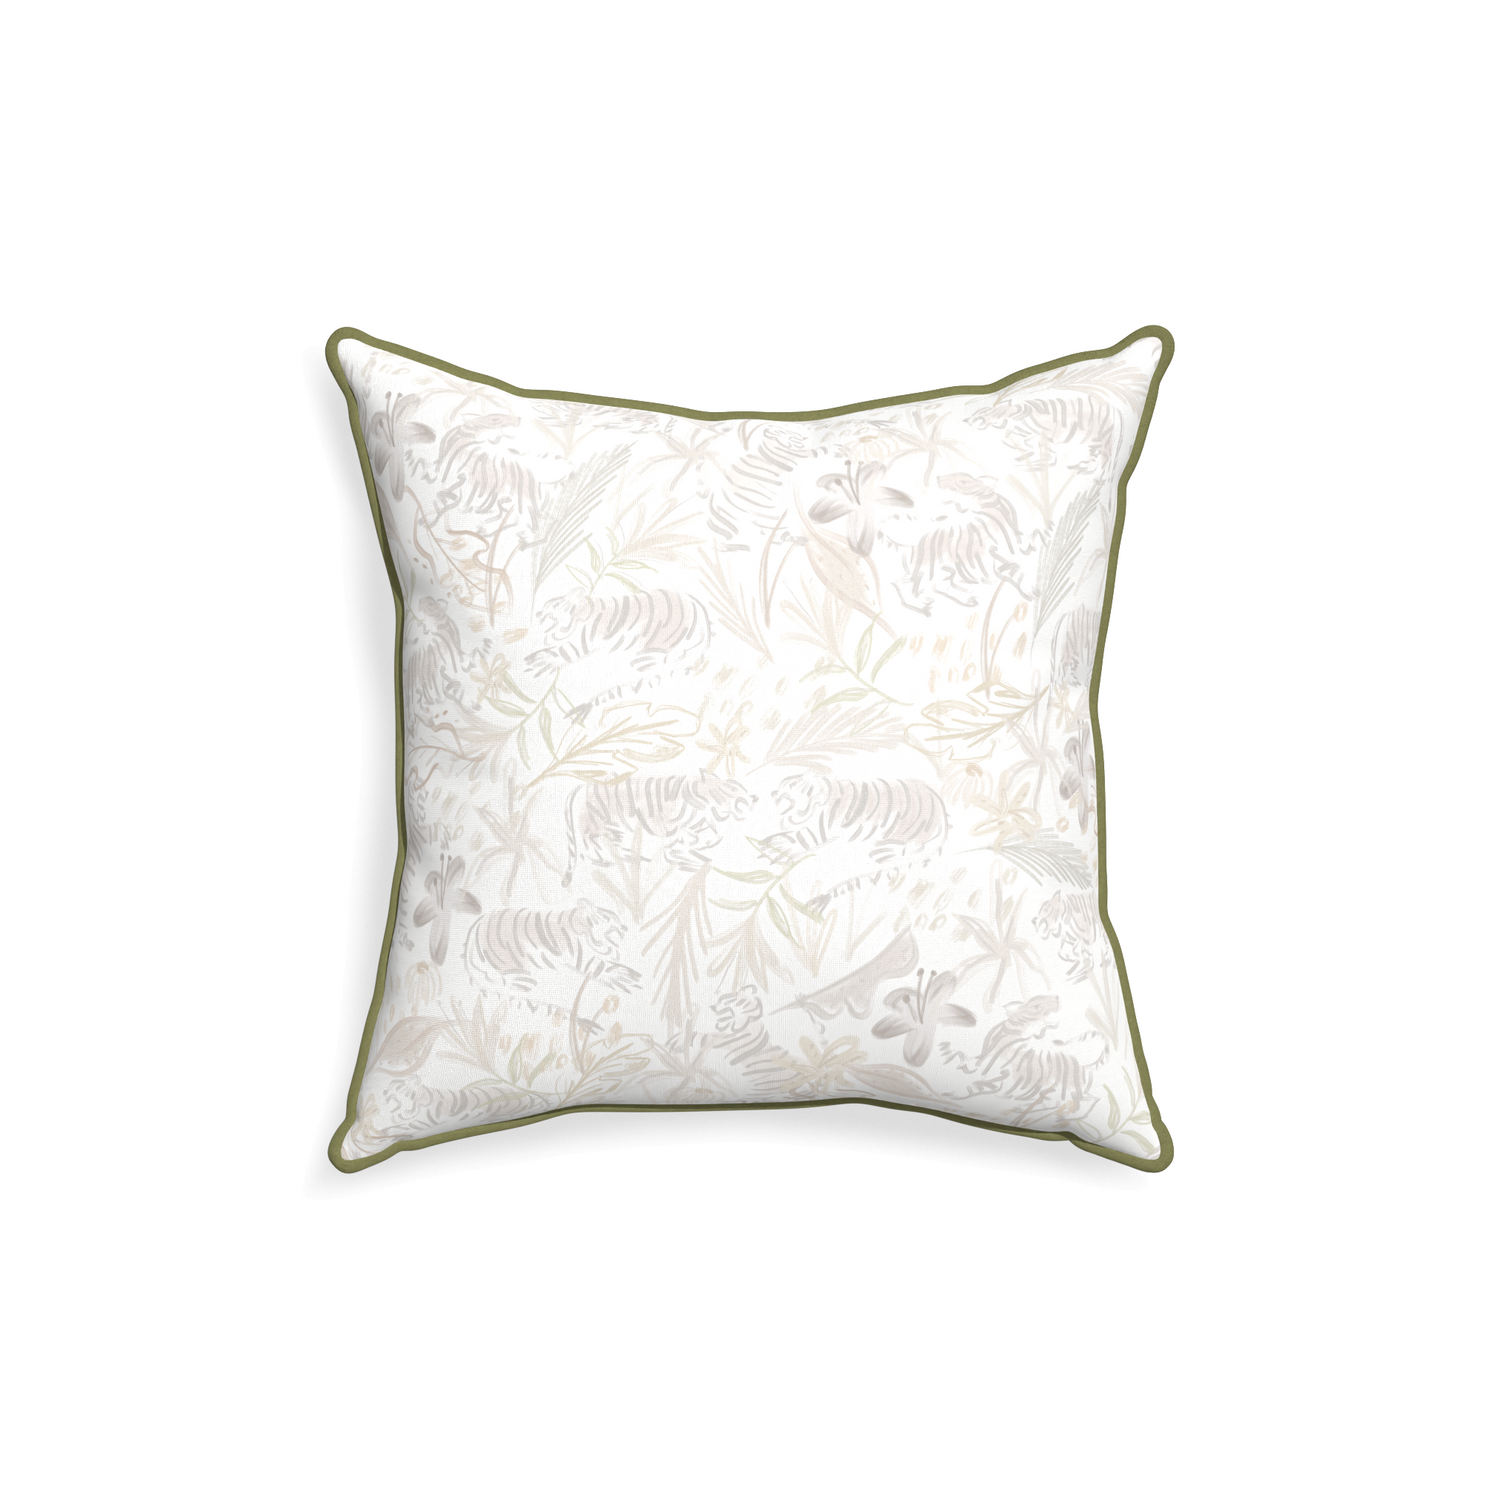 18-square frida sand custom beige chinoiserie tigerpillow with moss piping on white background